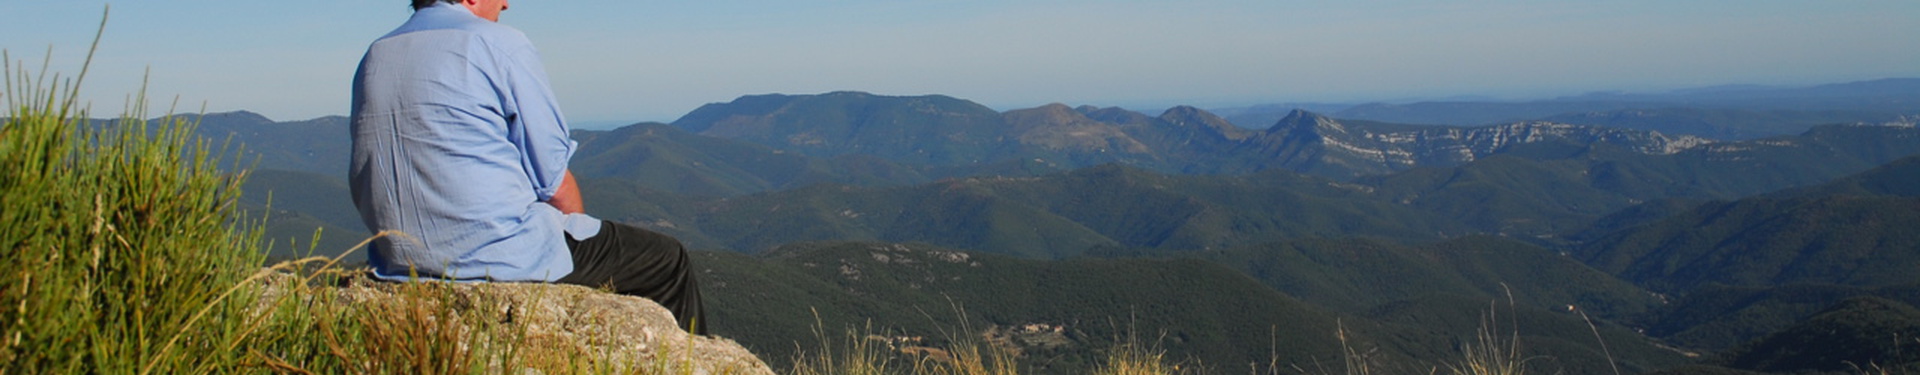 Booking form - Star of the Cévennes - Guided walking trip | Nature Occitane